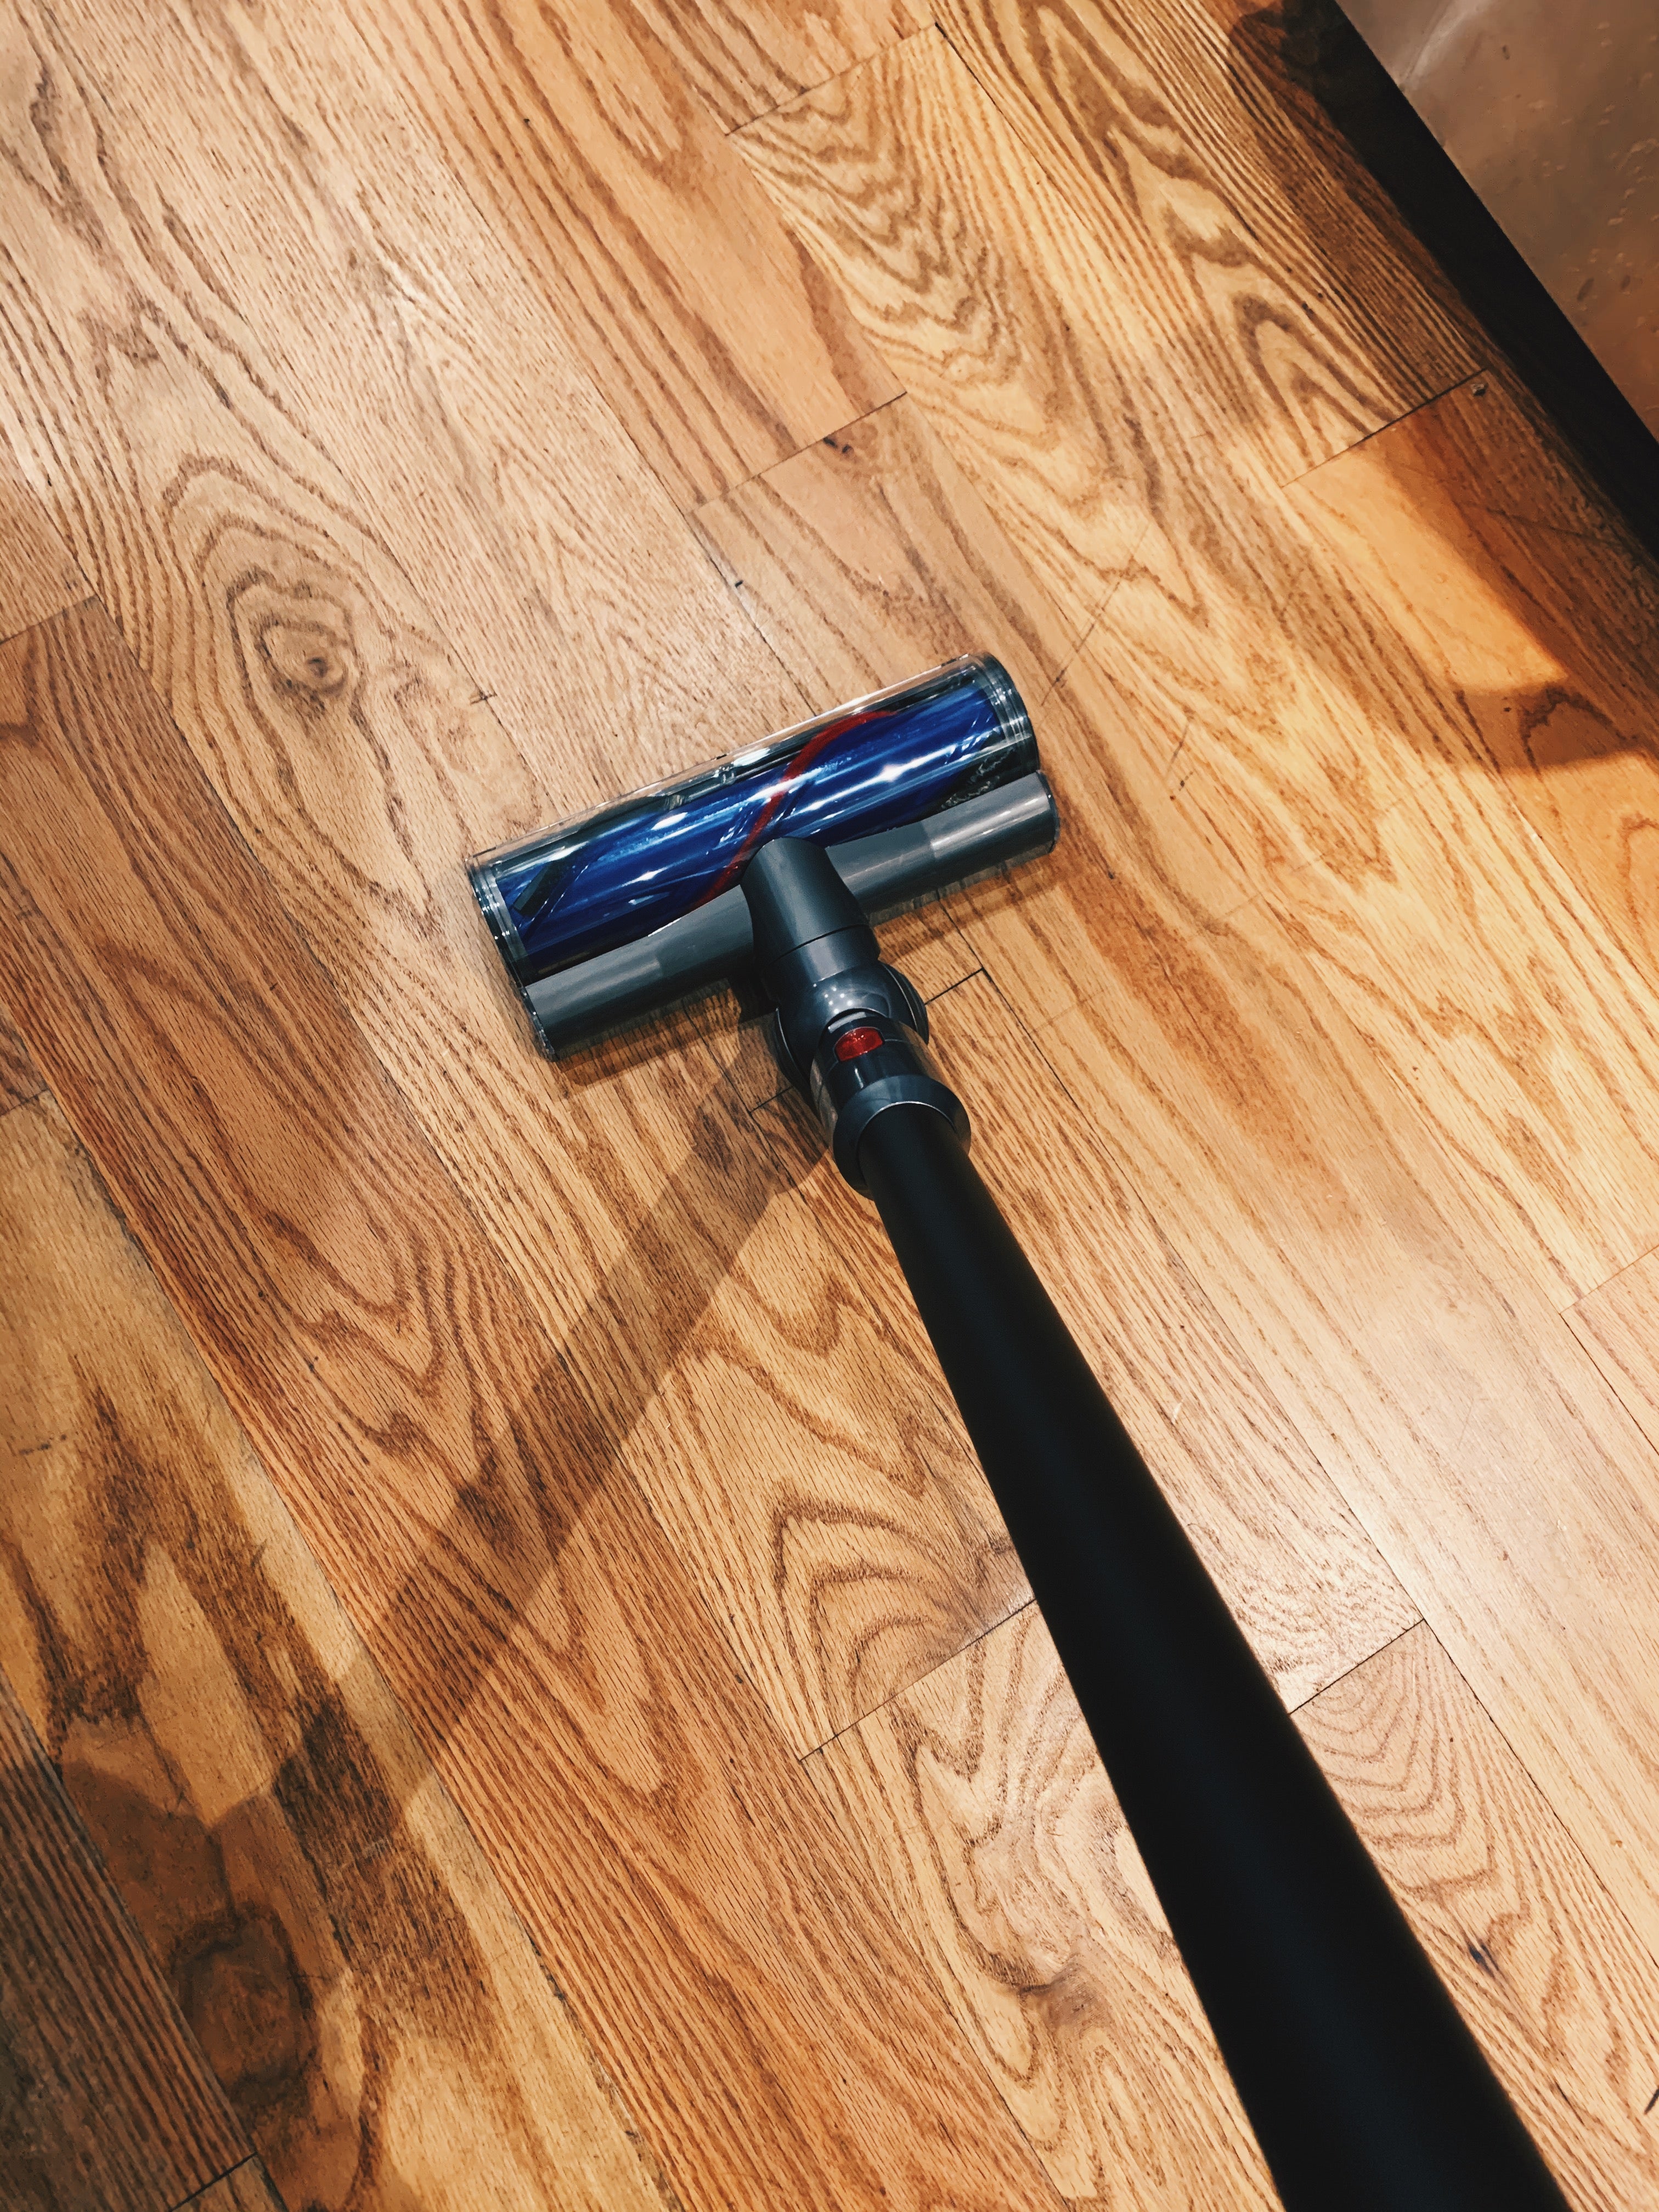 Best Dyson Vacuum 2020 V8 Absolute Review, Which Dyson V8 Attachment Is For Hardwood Floors